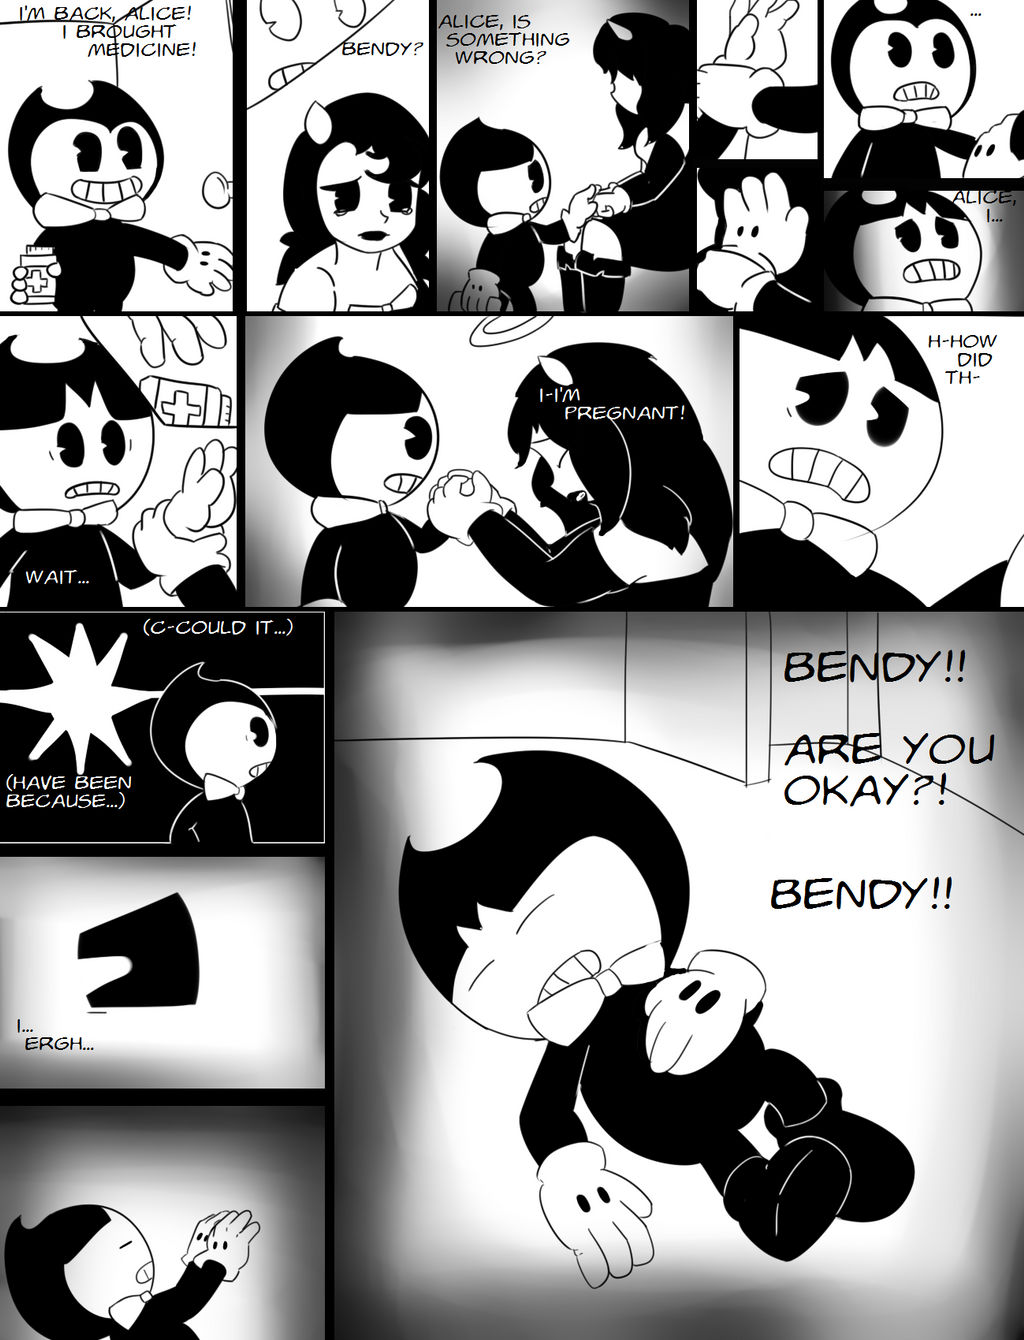 Bendy and the Ink Machine - Sick?(By RedGekkouga)2 by Shiro1026 on ...